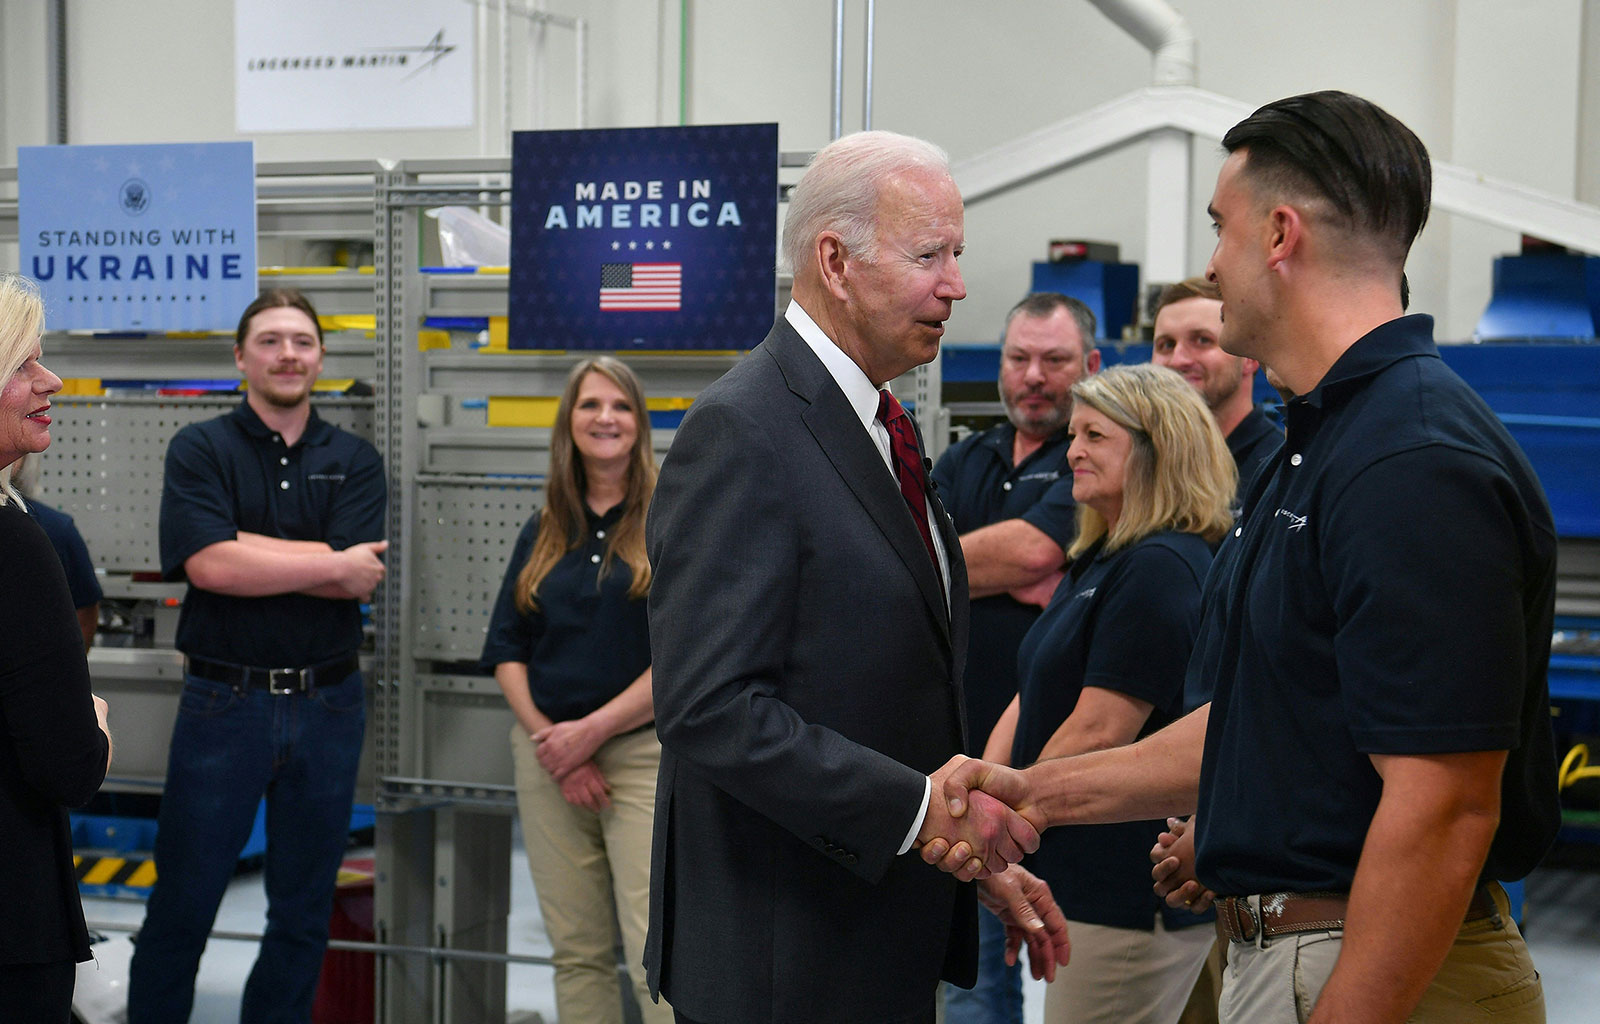 President Biden shakes hands with an employee at Lockheed Martin’s manufacturing facility in Troy, Alabama, on Tuesday.